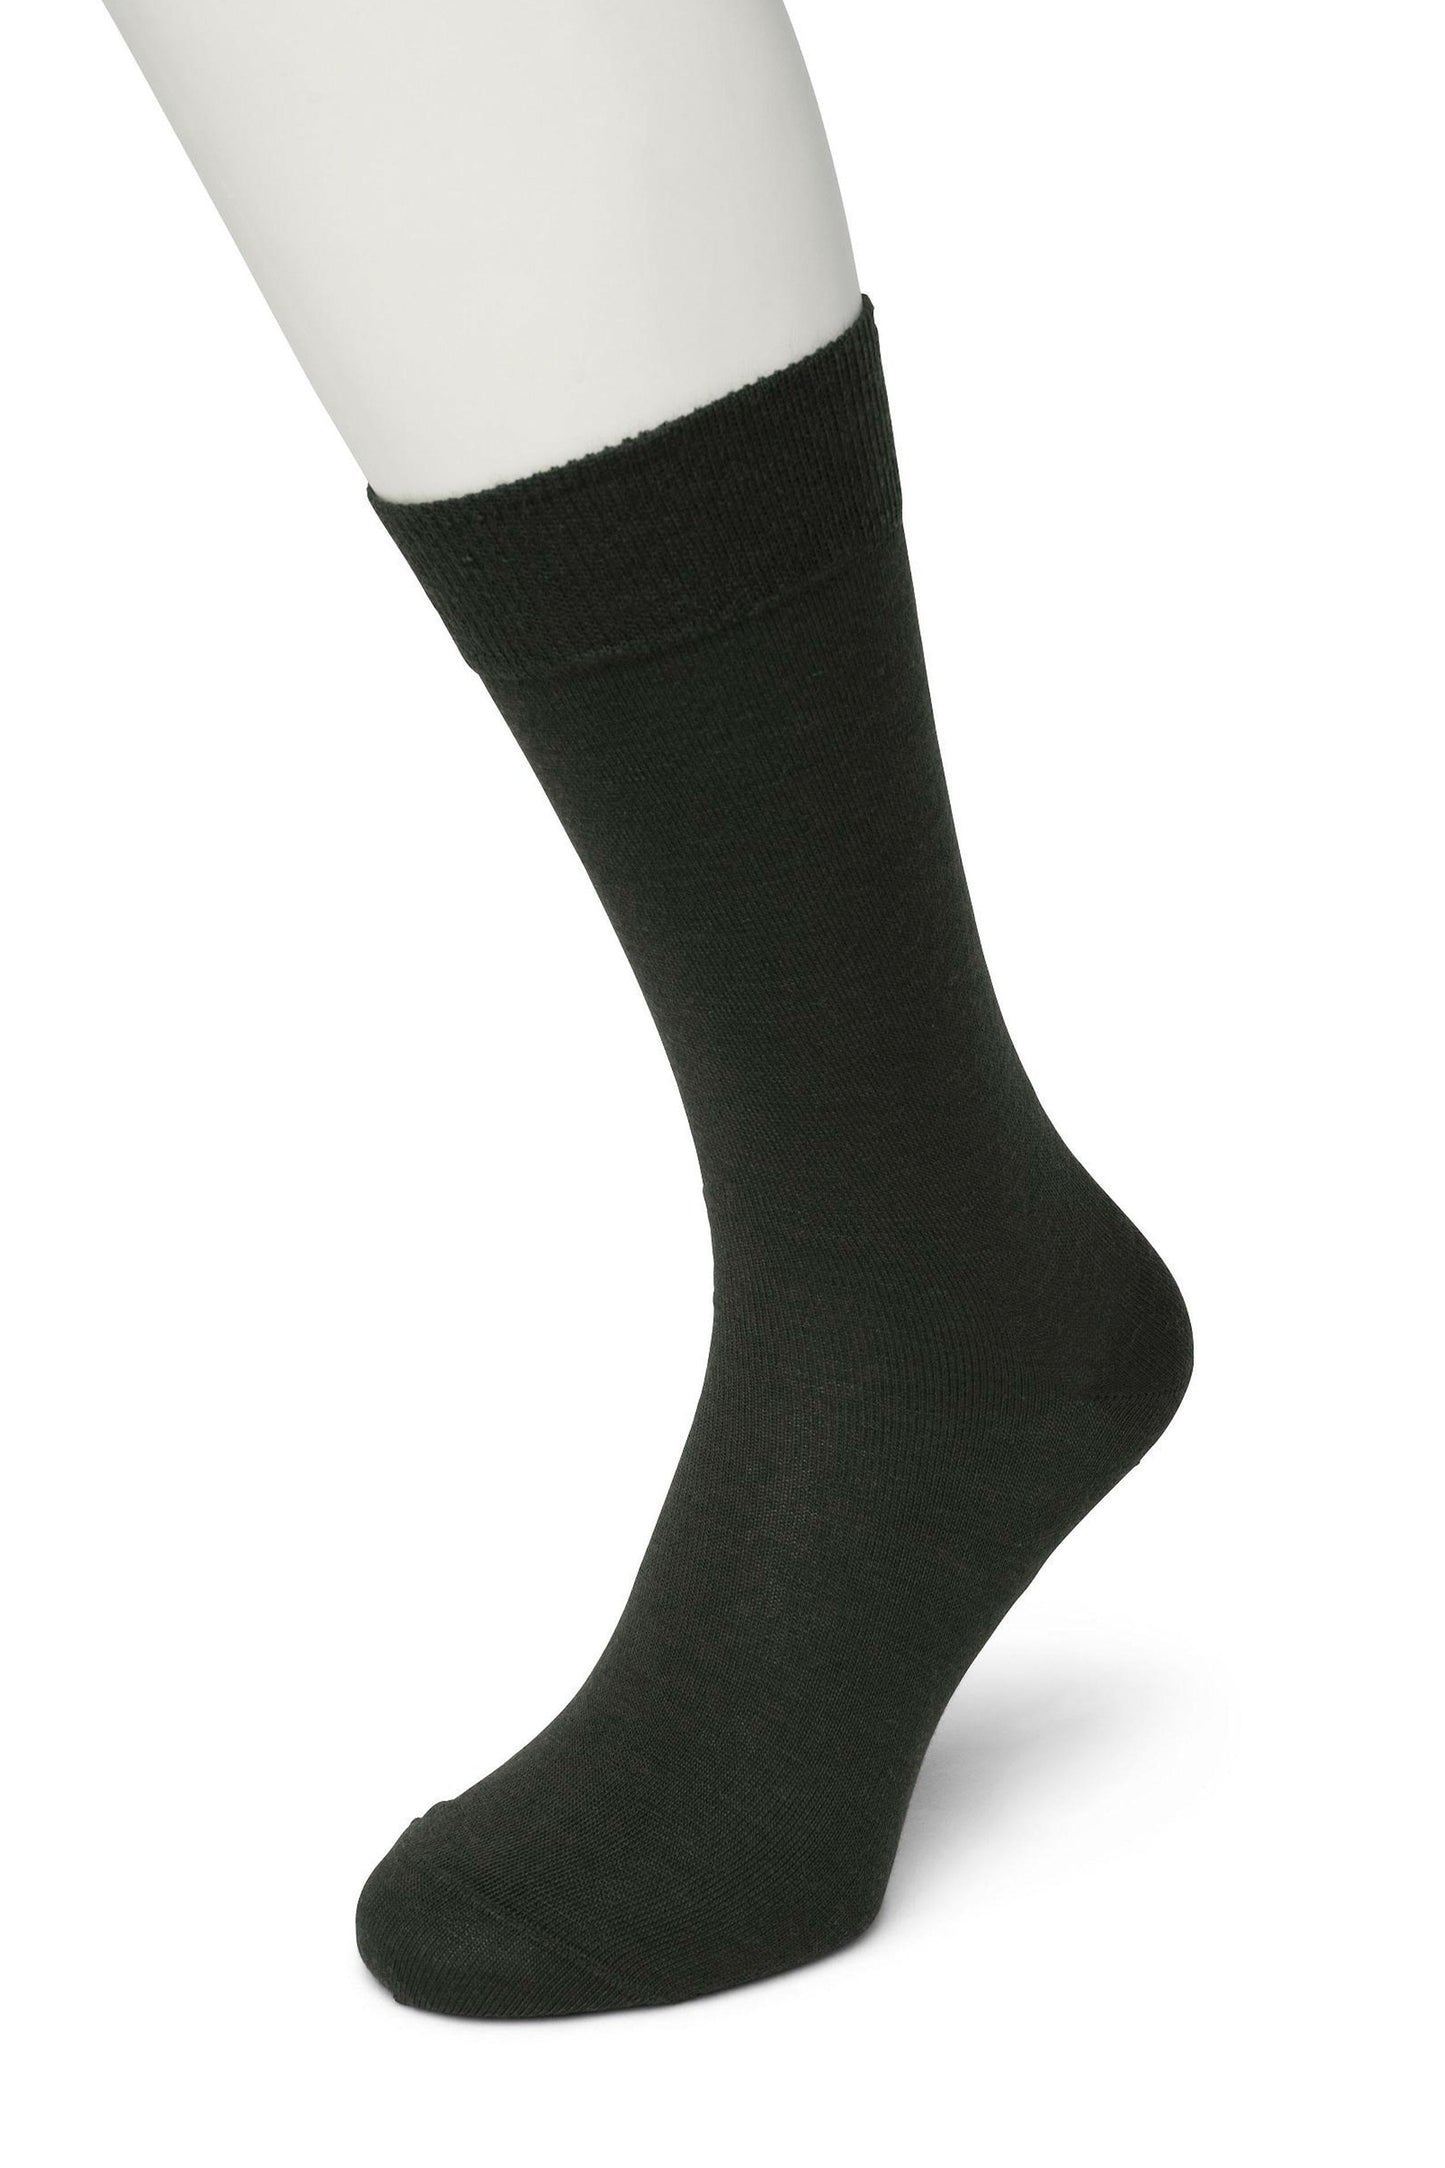 Bonnie Doon Wool/Cotton Sock BD631402 - Dark khaki green (olive) warm thermal ankle socks perfect for the cold Winter weather